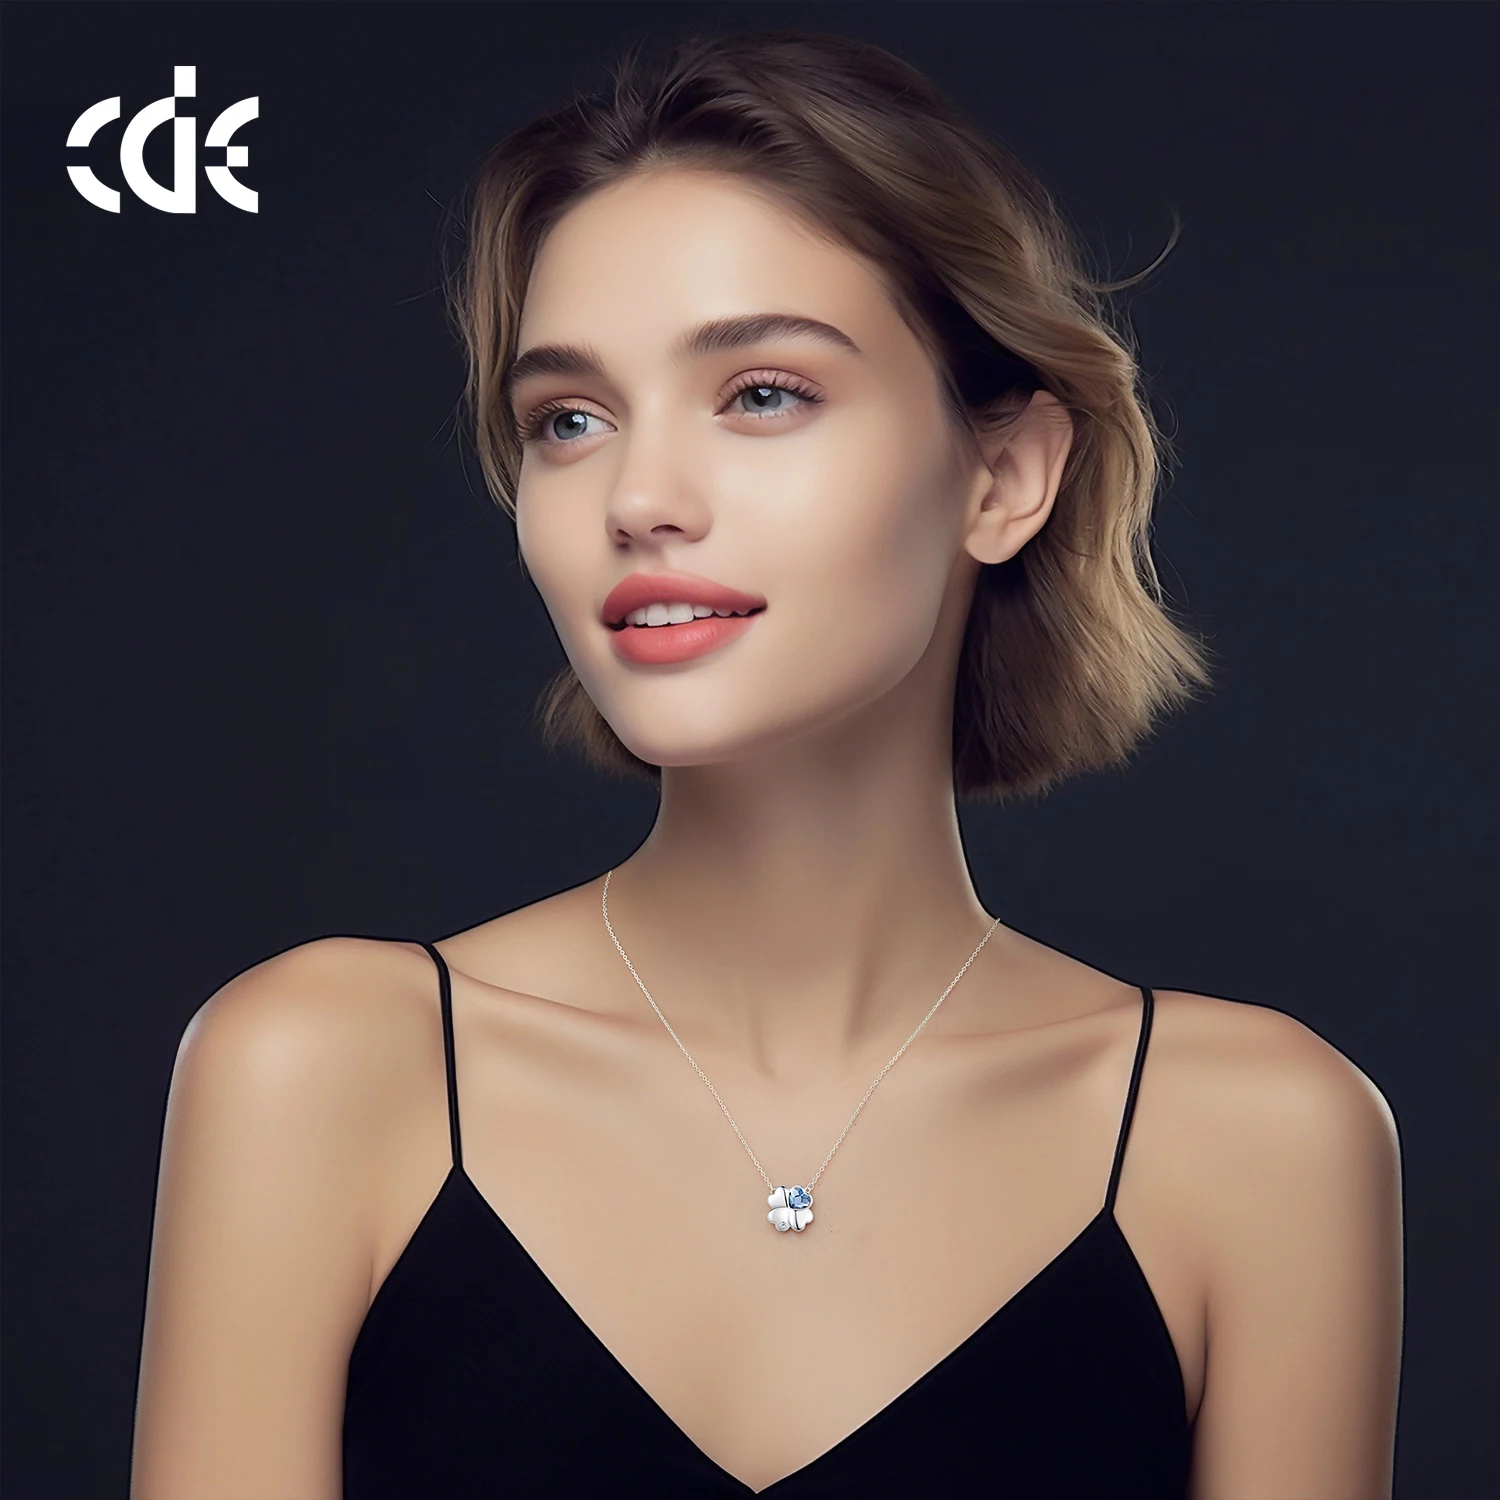 CDE YN1212 Fine Jewelry 925 Sterling Silver Heart Crystal Necklace Four-Leaf Clover Pendant Lucky Necklaces For Girl Gift